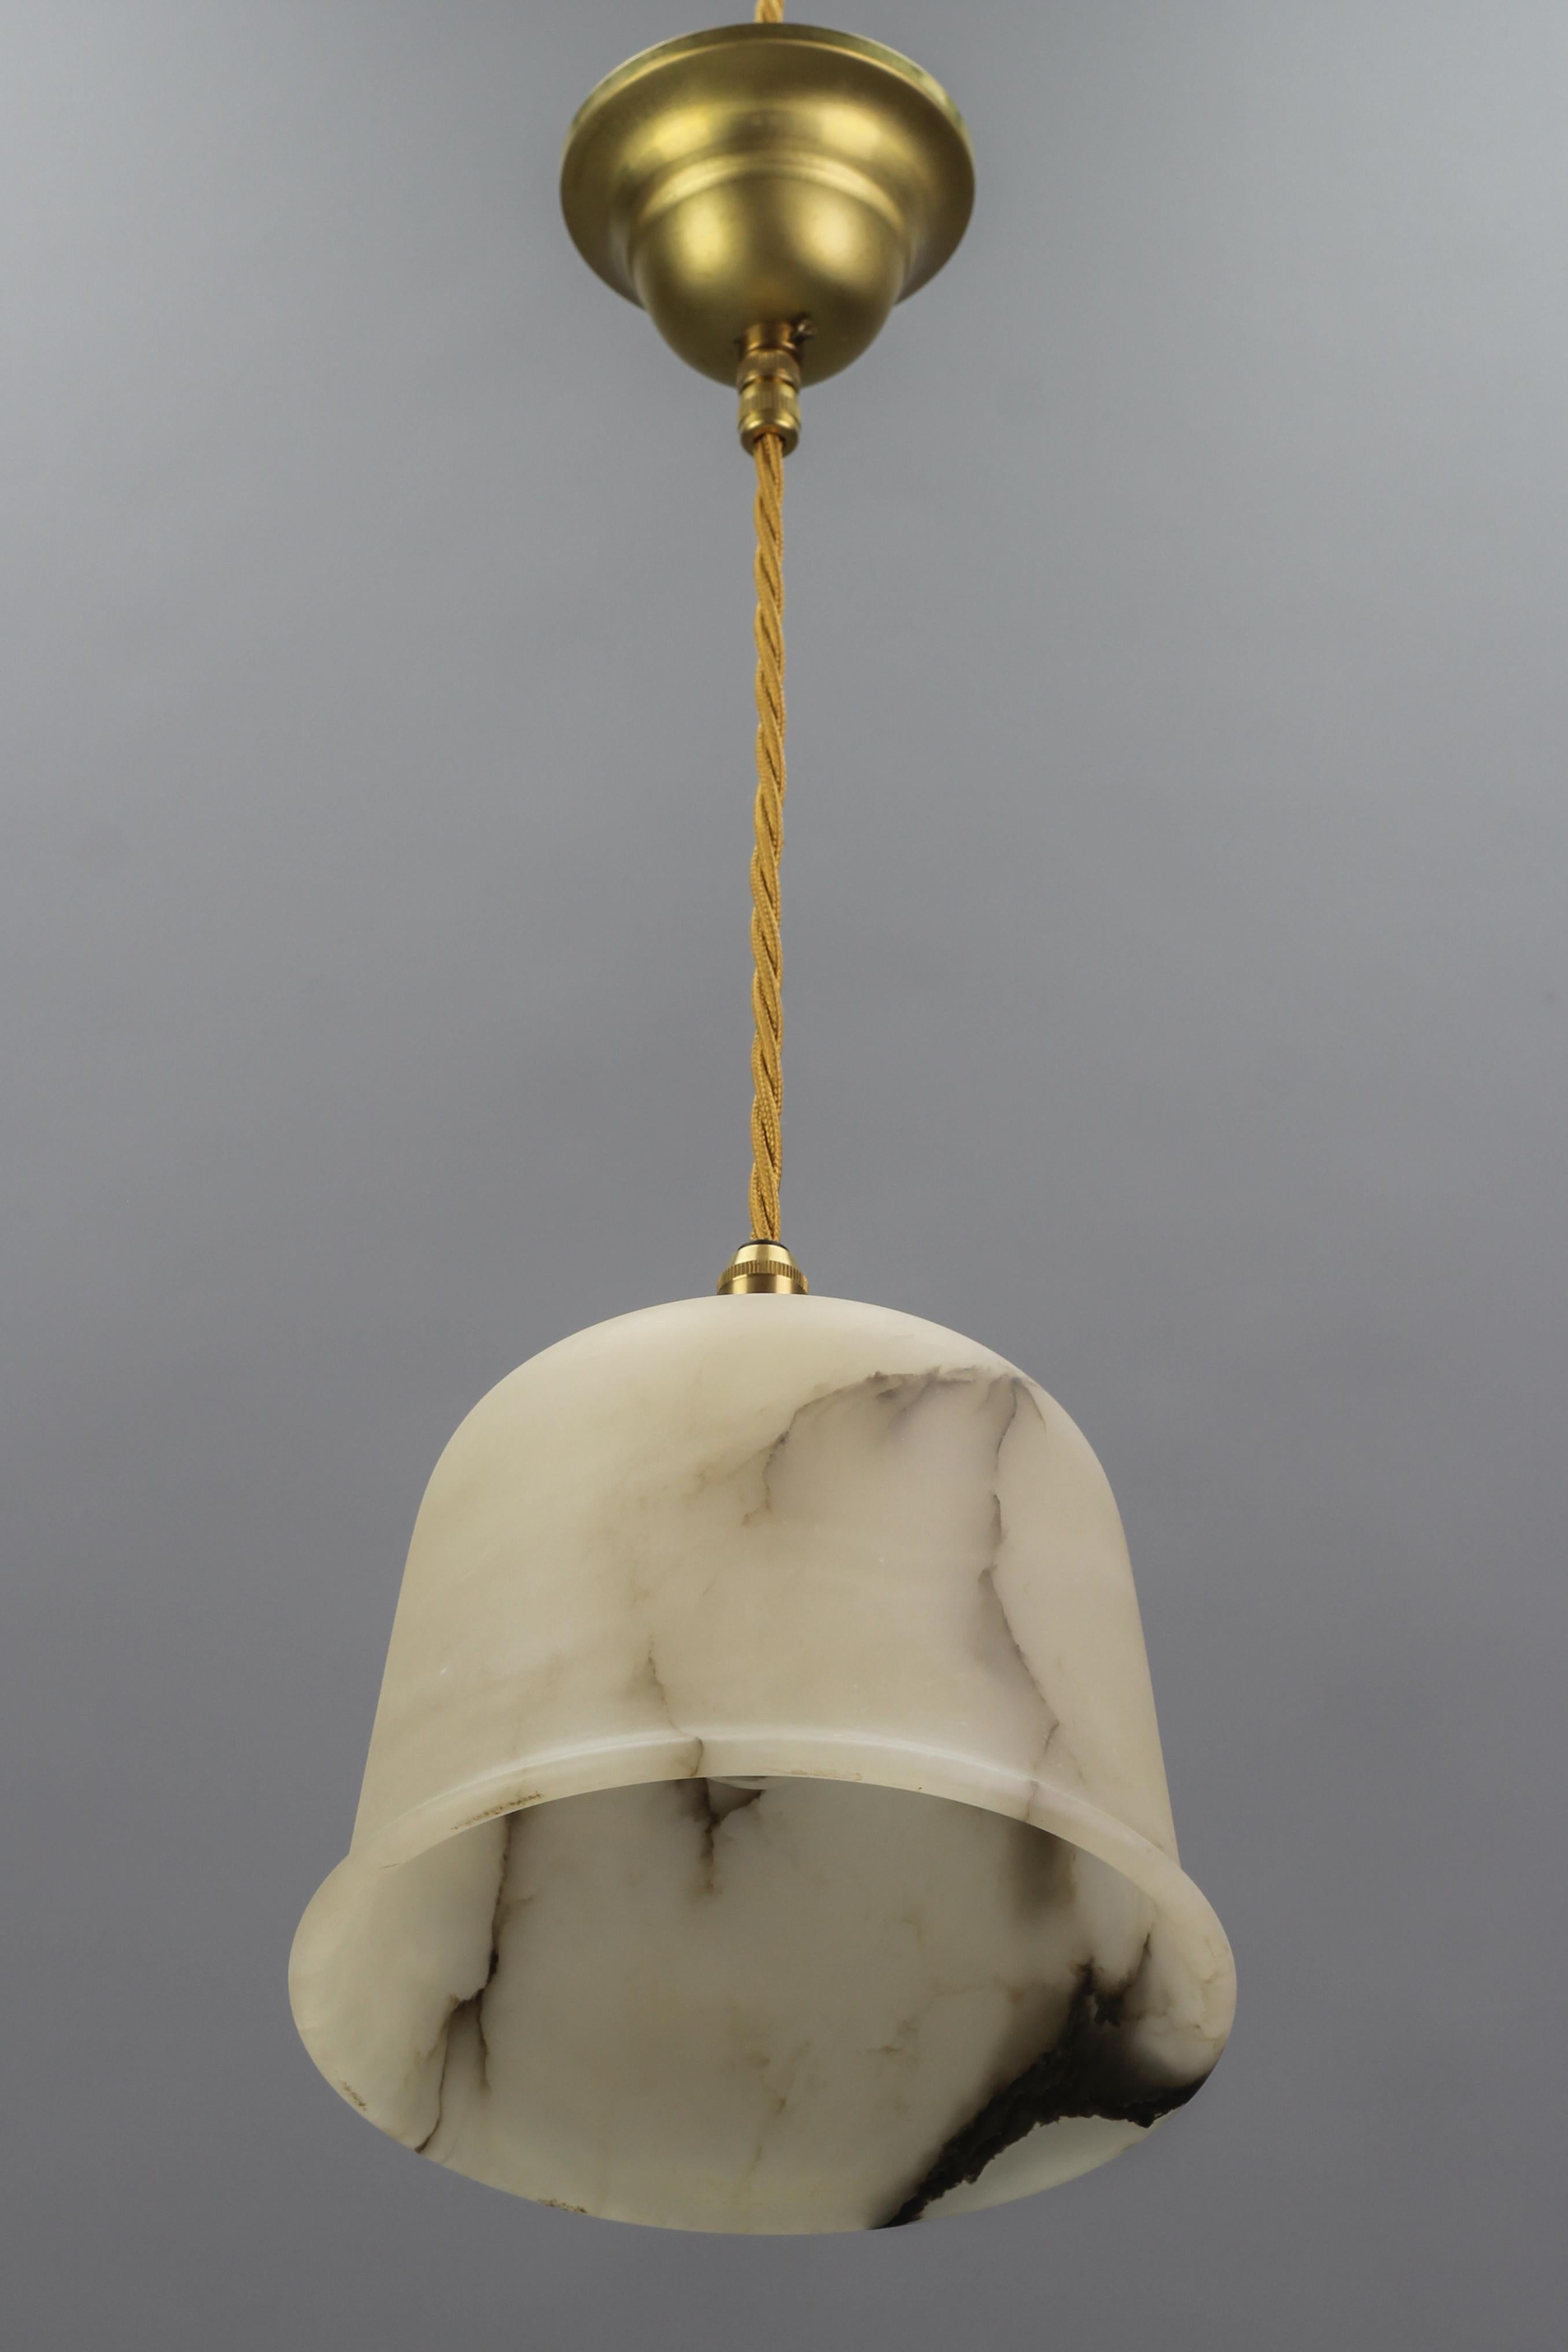 Adorable and compact Art Deco alabaster pendant light.
The beautifully veined white and black alabaster lampshade is suspended from a brass canopy. The light shining through the white stone with dark brown and black veins is warm and atmospheric,